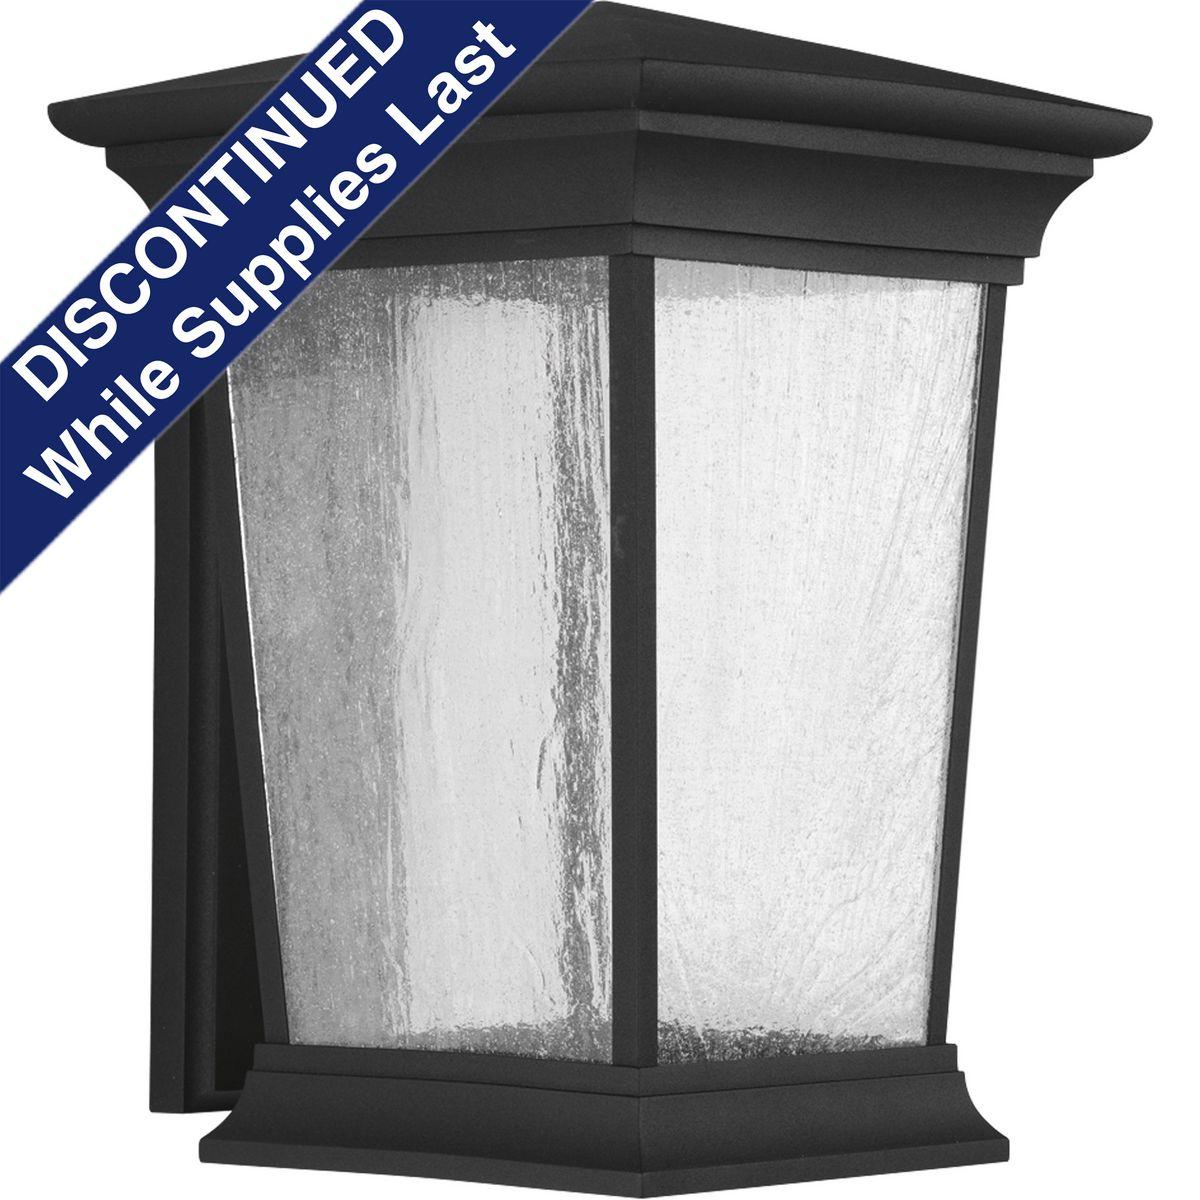 Hubbell P6076-3130K9 Arrive LED lanterns feature a die-cast aluminum, powder coated frame and heavily textured glass. One-light extra-large wall lantern. 90+ CRI, 3000K, 1,211 lumens 71.2 lumens/watt per module (source). Energy Star.  ; Die-cast aluminum, powder coated frame.